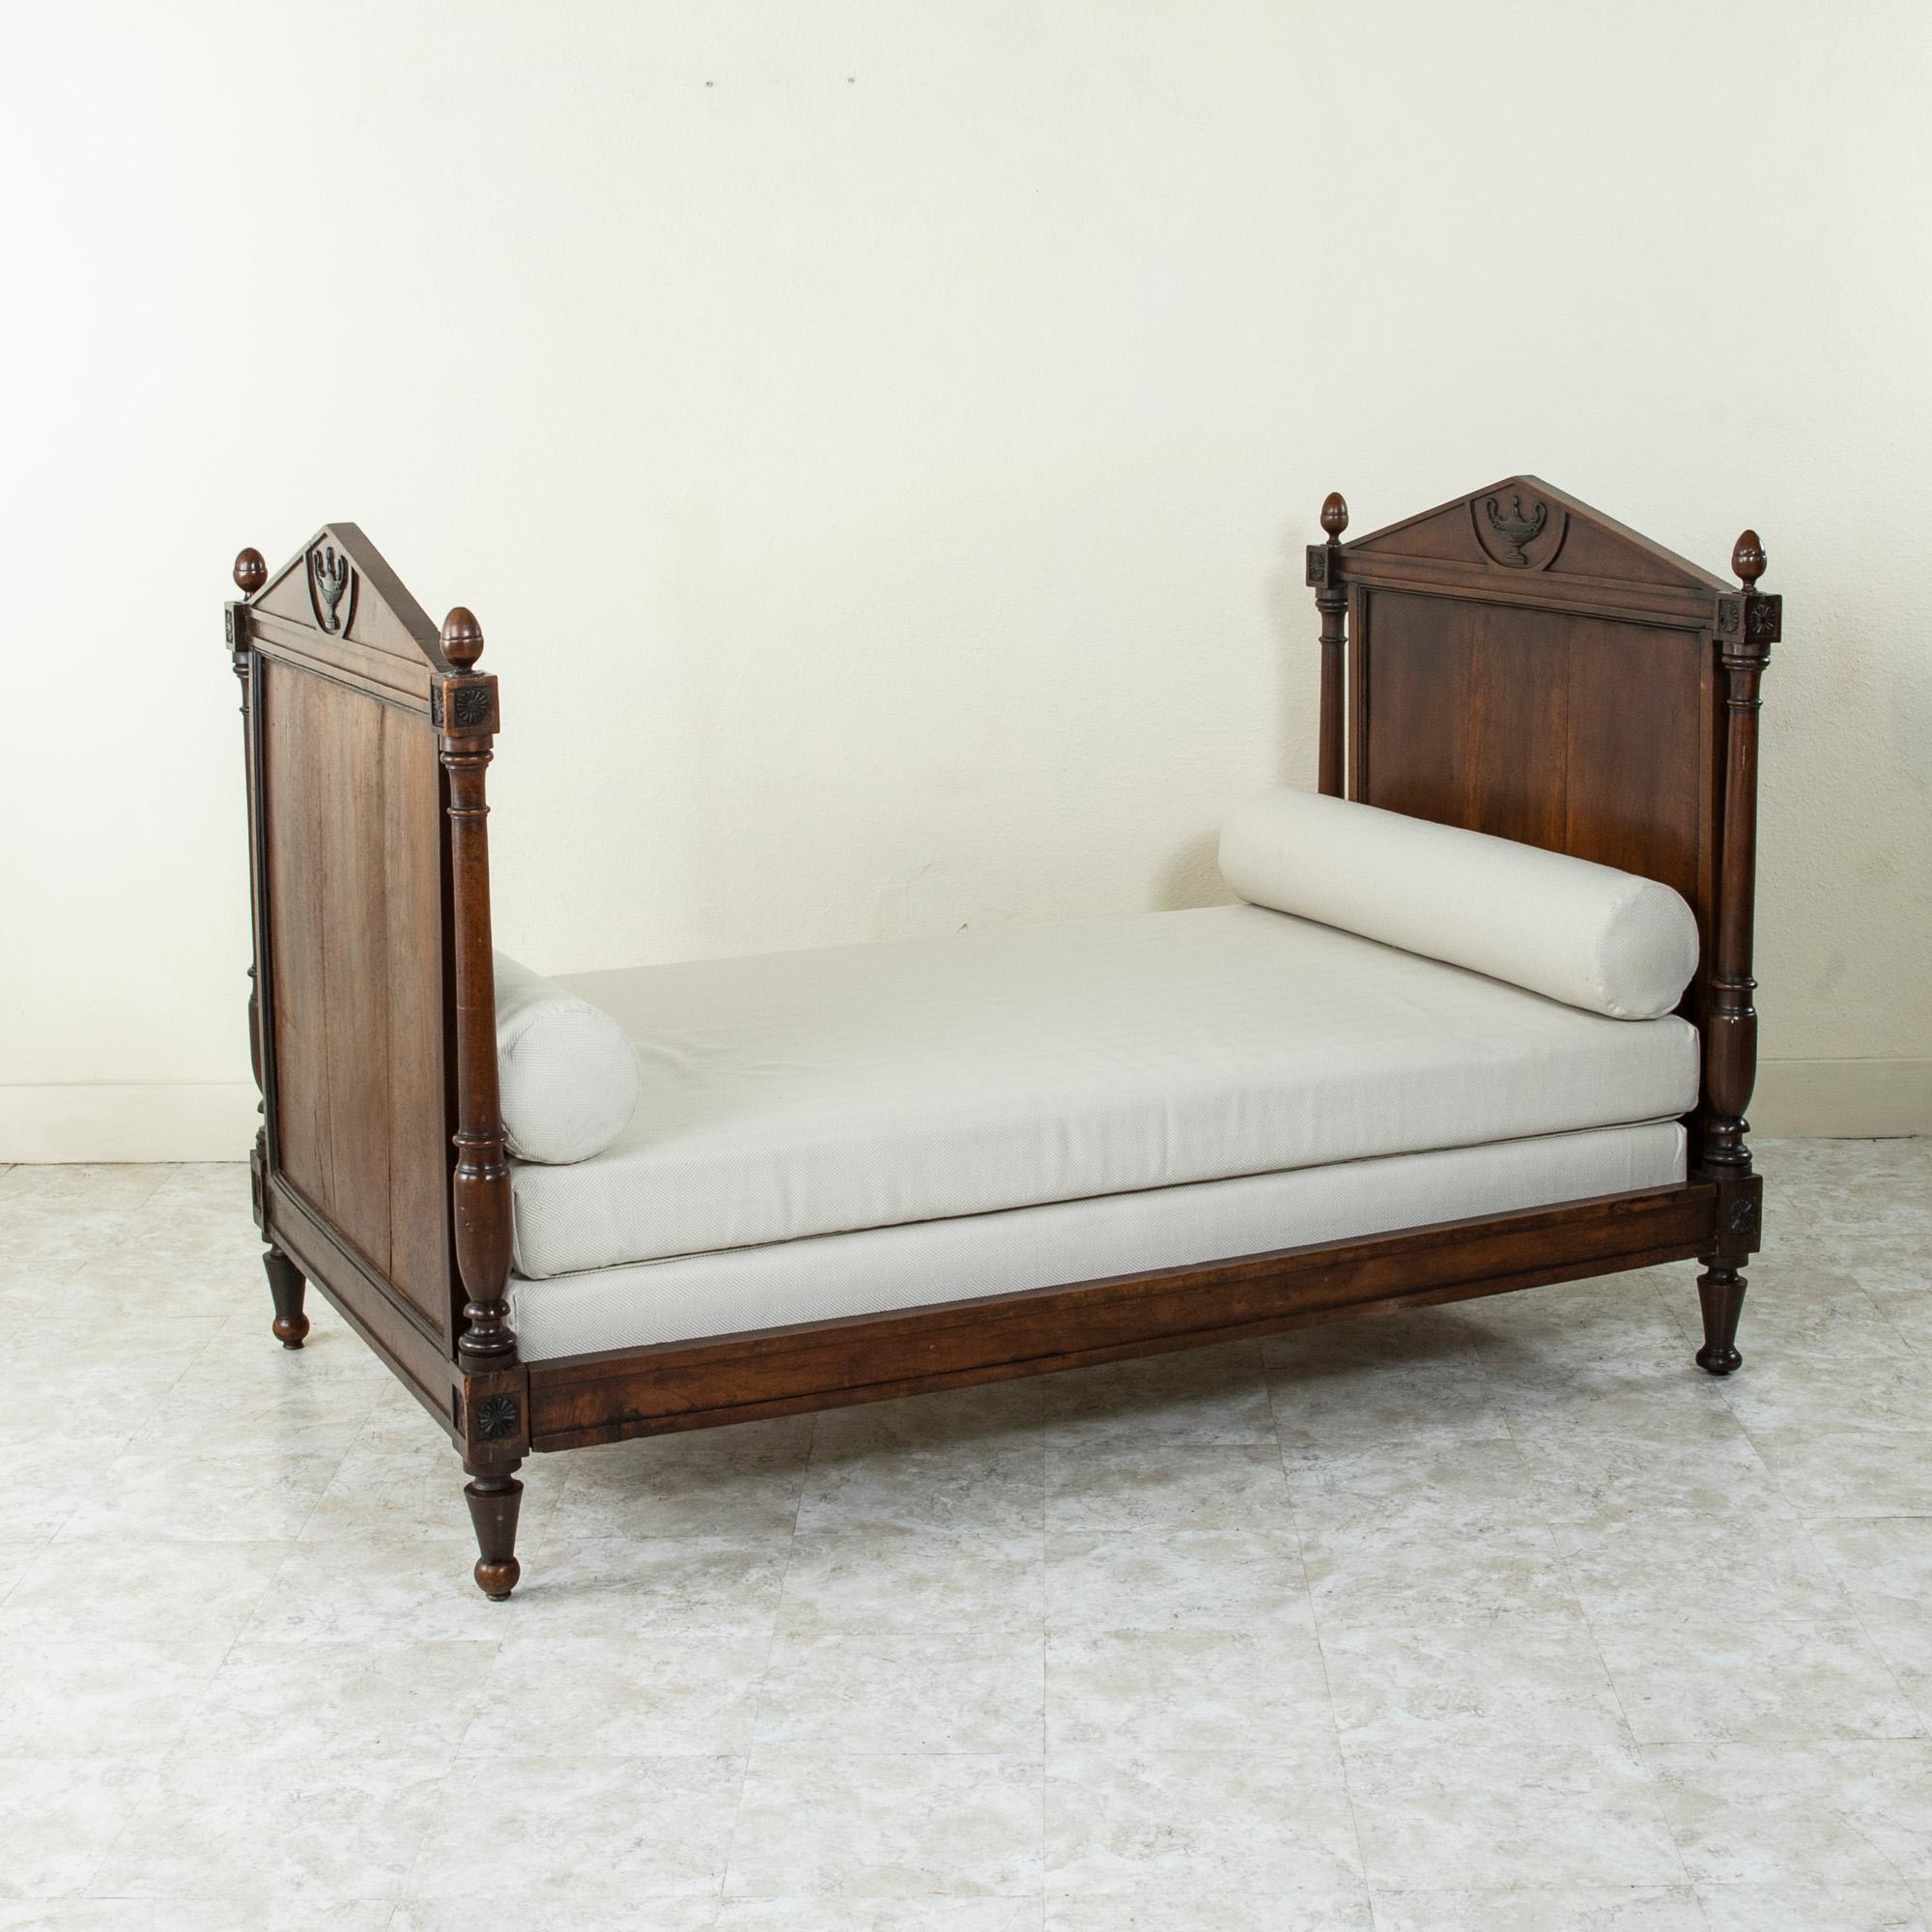 This French Directoire period walnut daybed from the late eighteenth century features hand carved rosettes on the die joints. Each end is crowned with a double faced pediment detailed with a hand carved central urn on each side. The mattress and